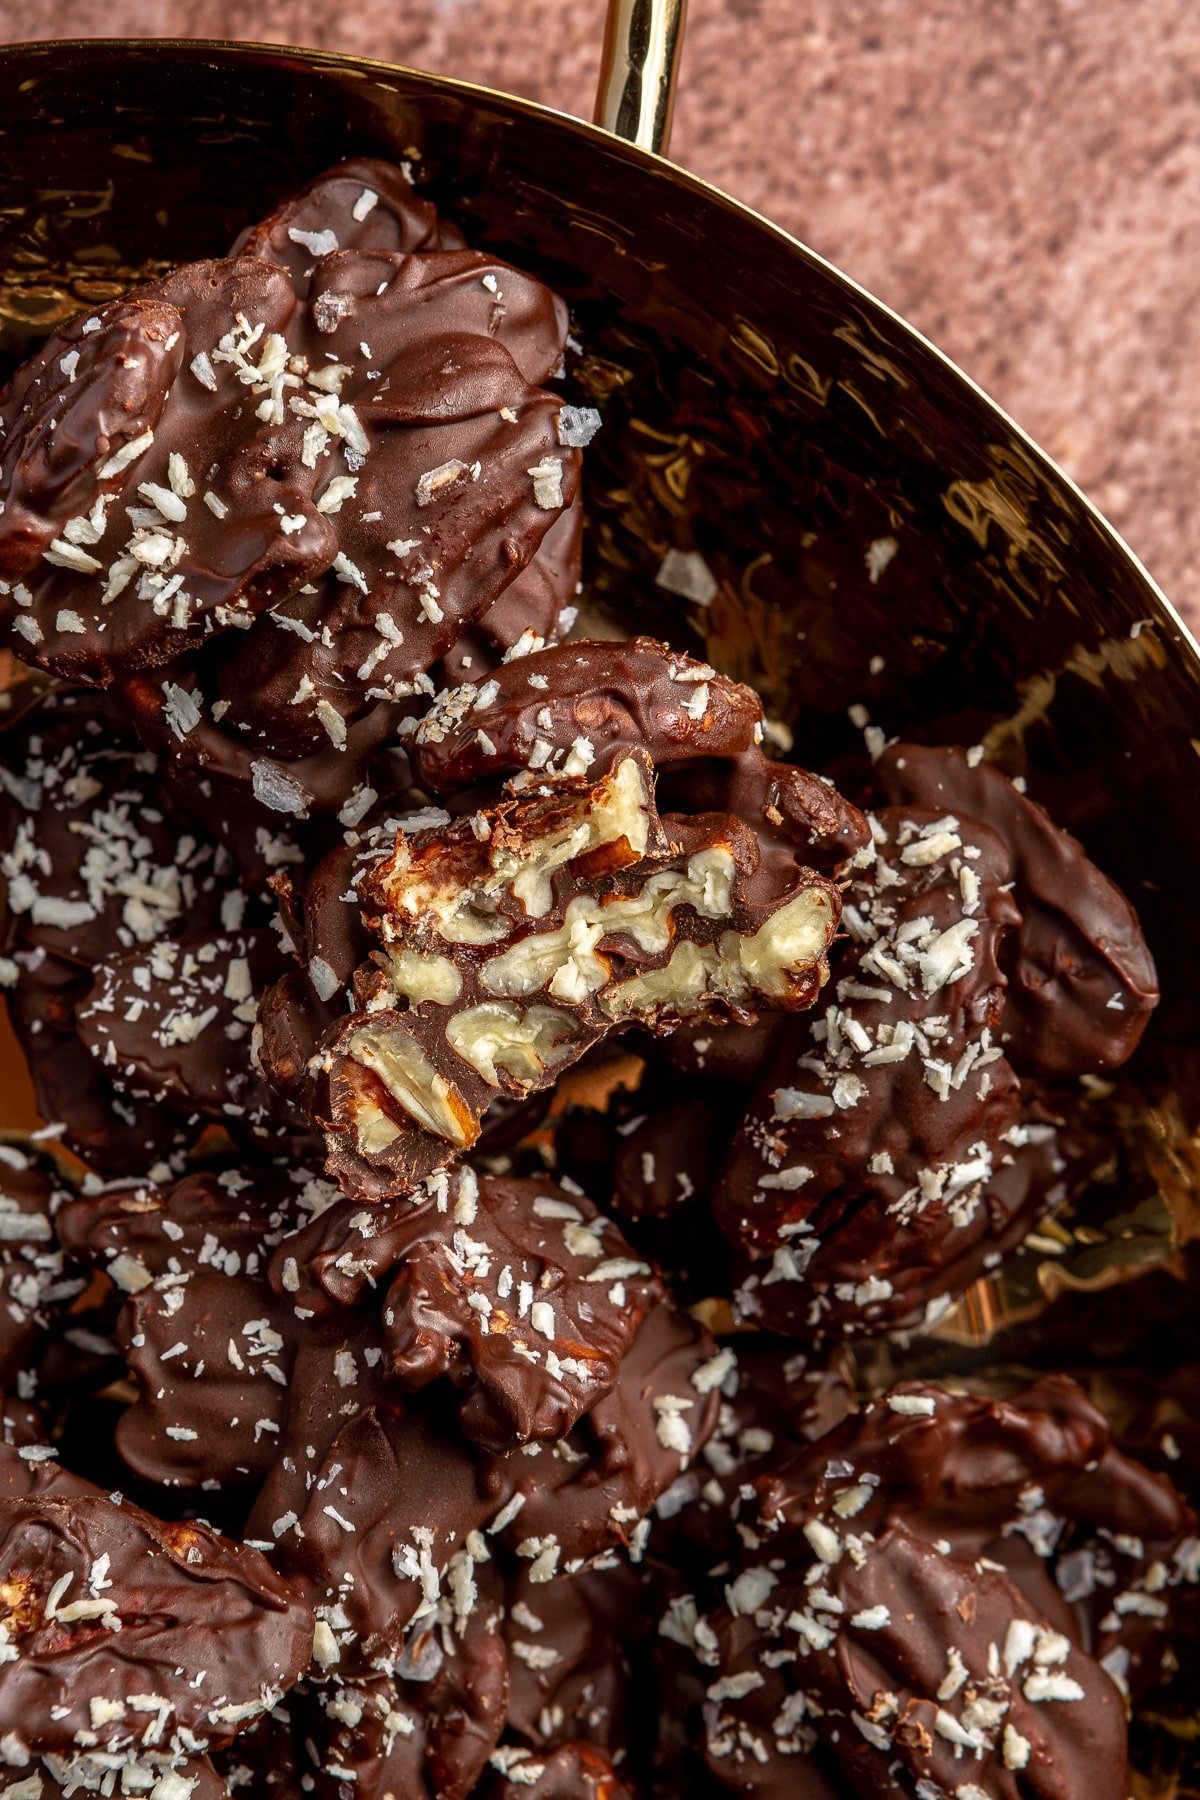 Crunchy nut clusters with chocolate chips in a bowl Stock Photo